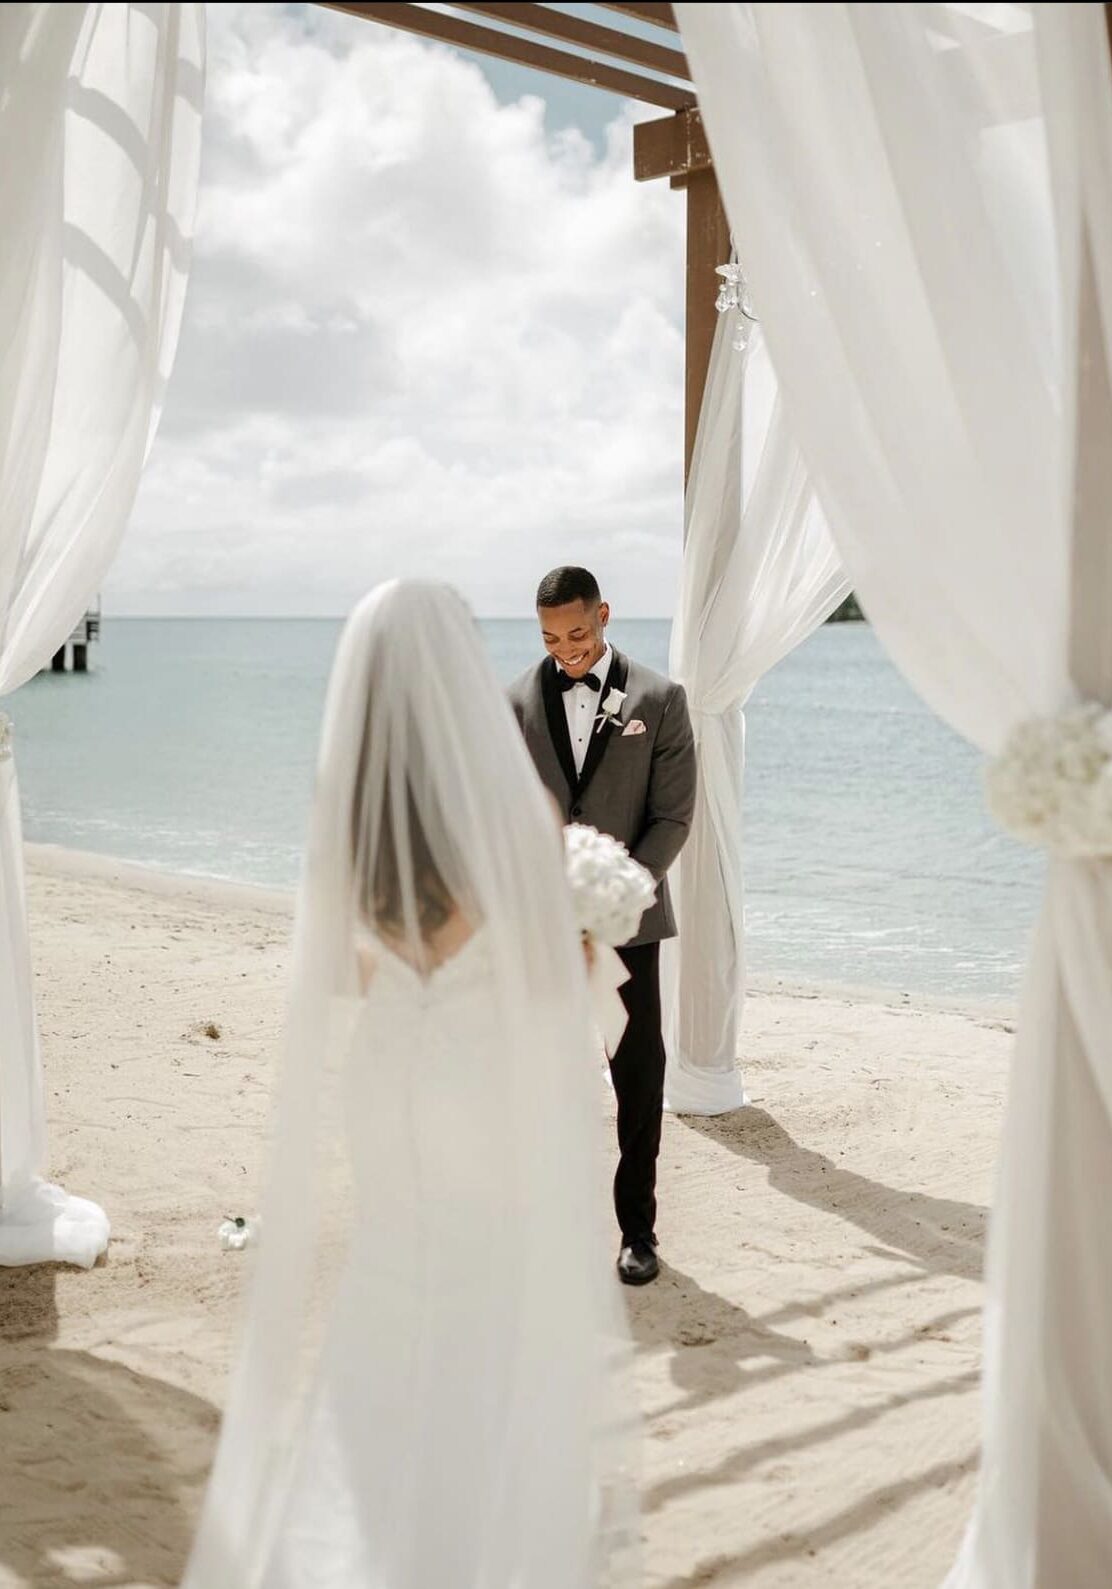 A bride and groom standing under an awning on the beach.